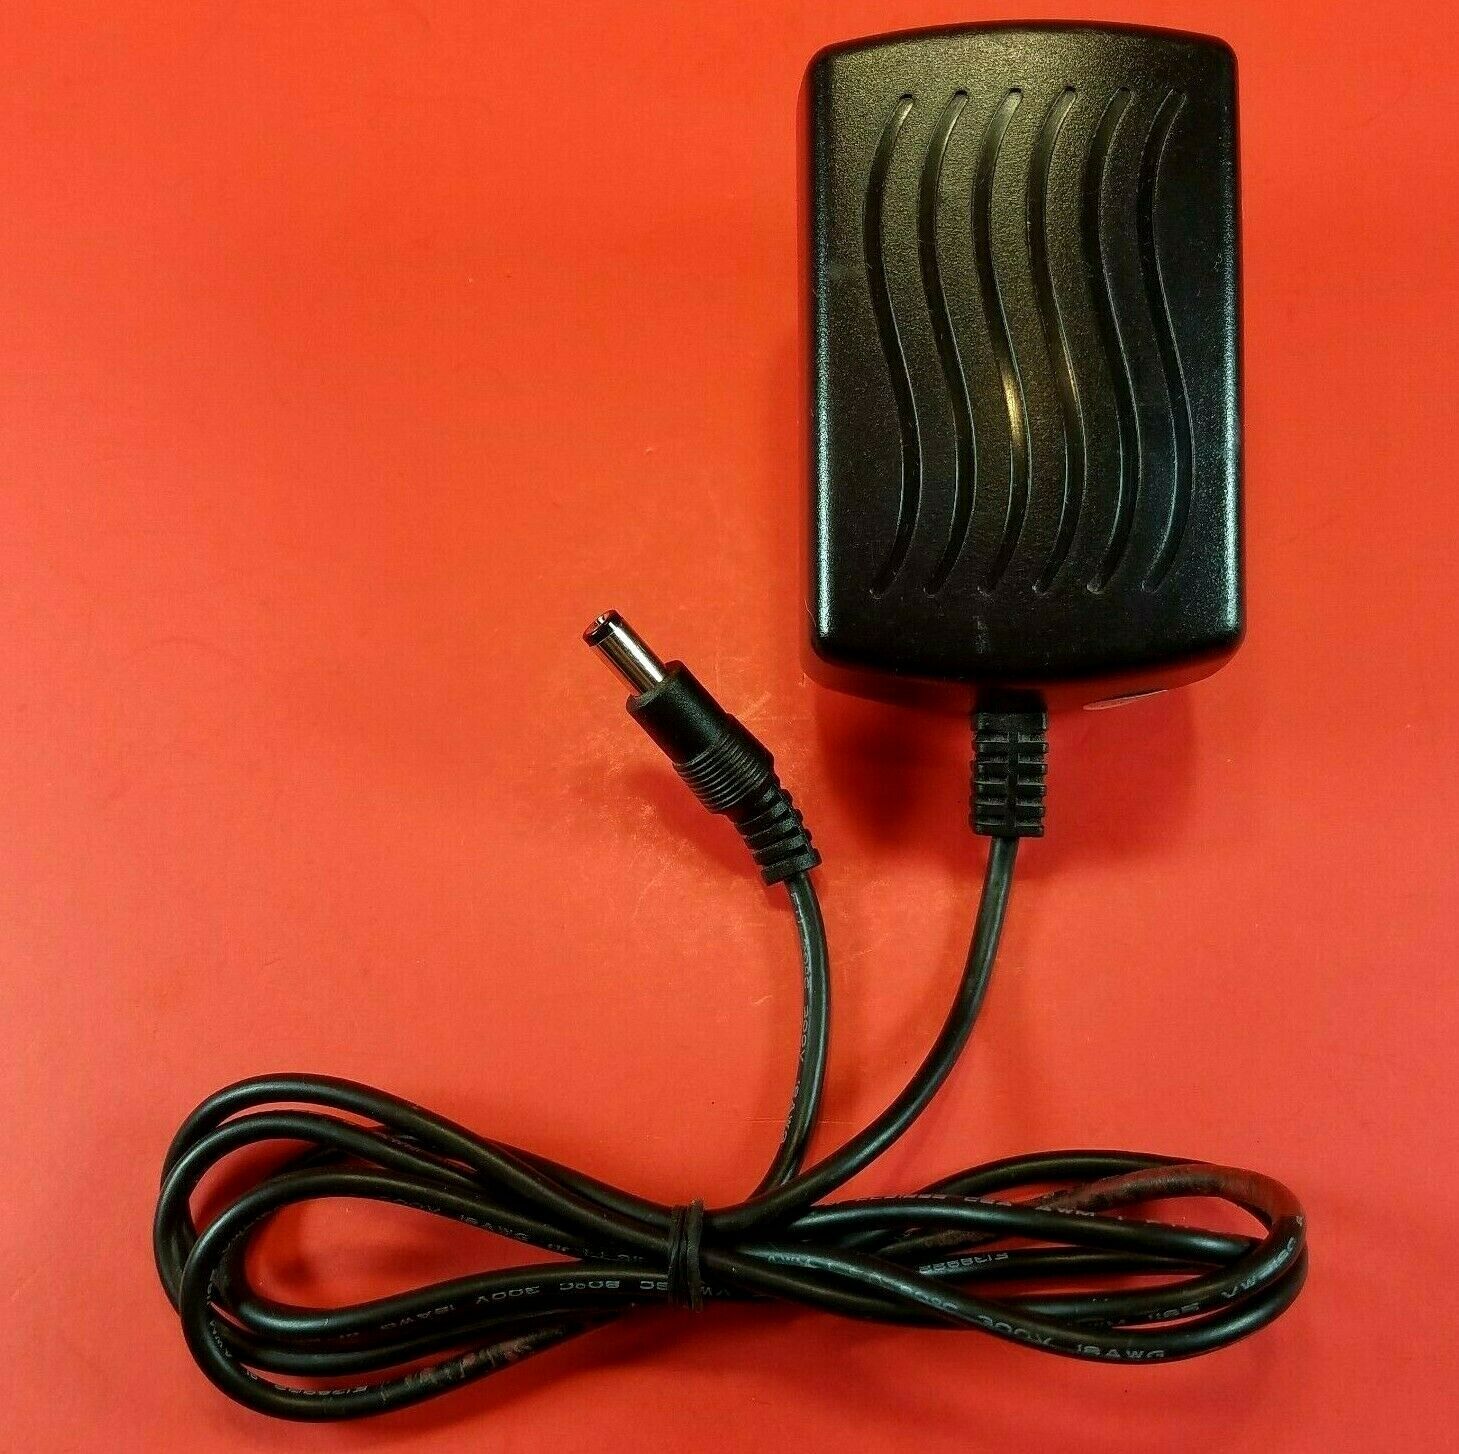 AC Adapter Model: SPS24-12.0-2000 Power Supply Adaptor 12V DC 2000mA OEM Charger Type: AC Adapter Output Voltage: 12 V